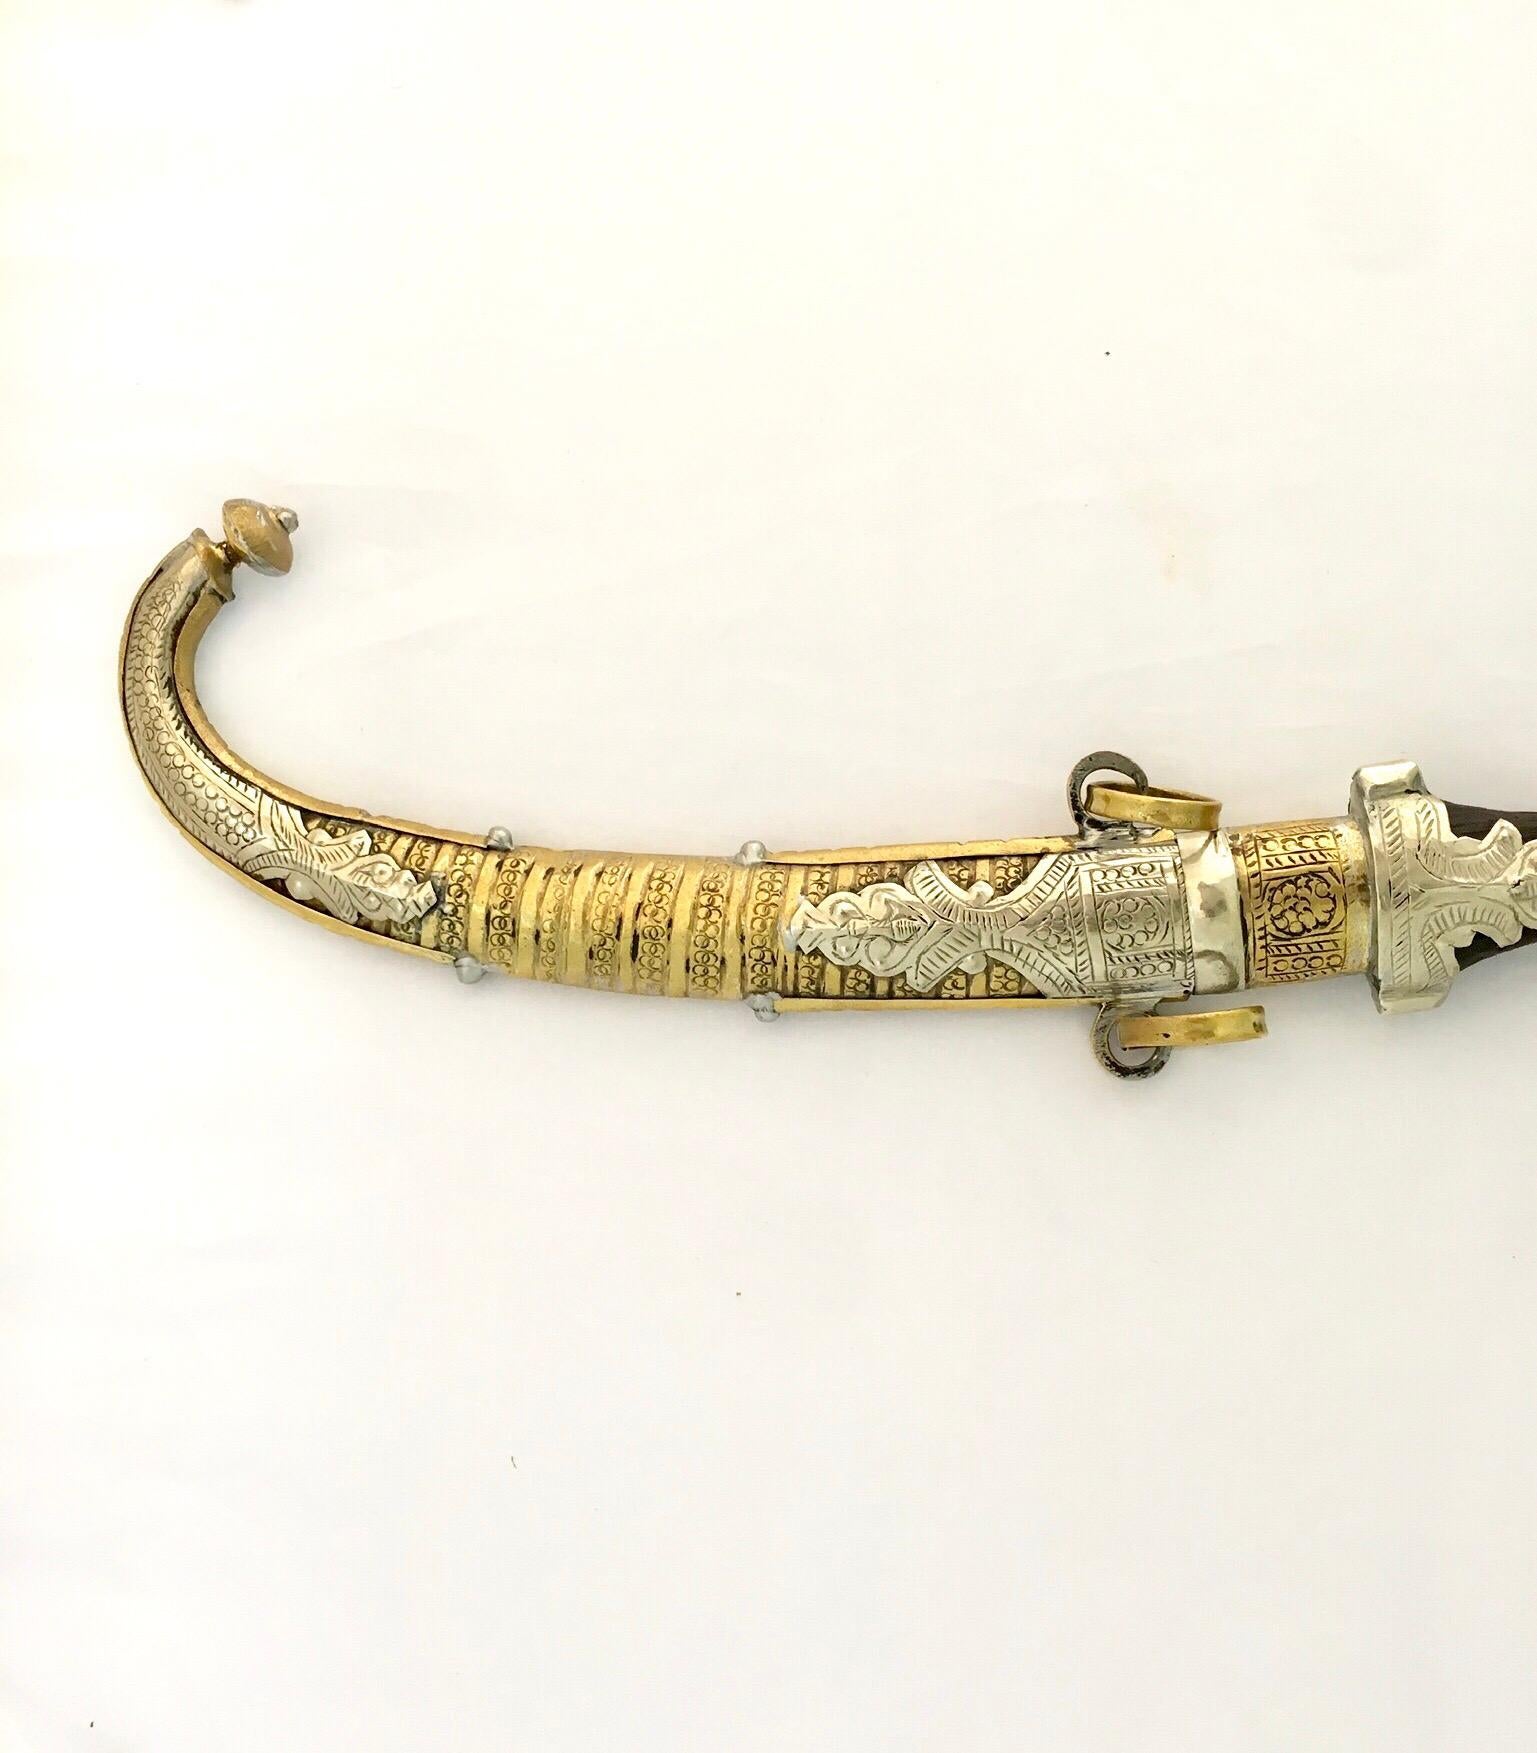 dagger with curved blade